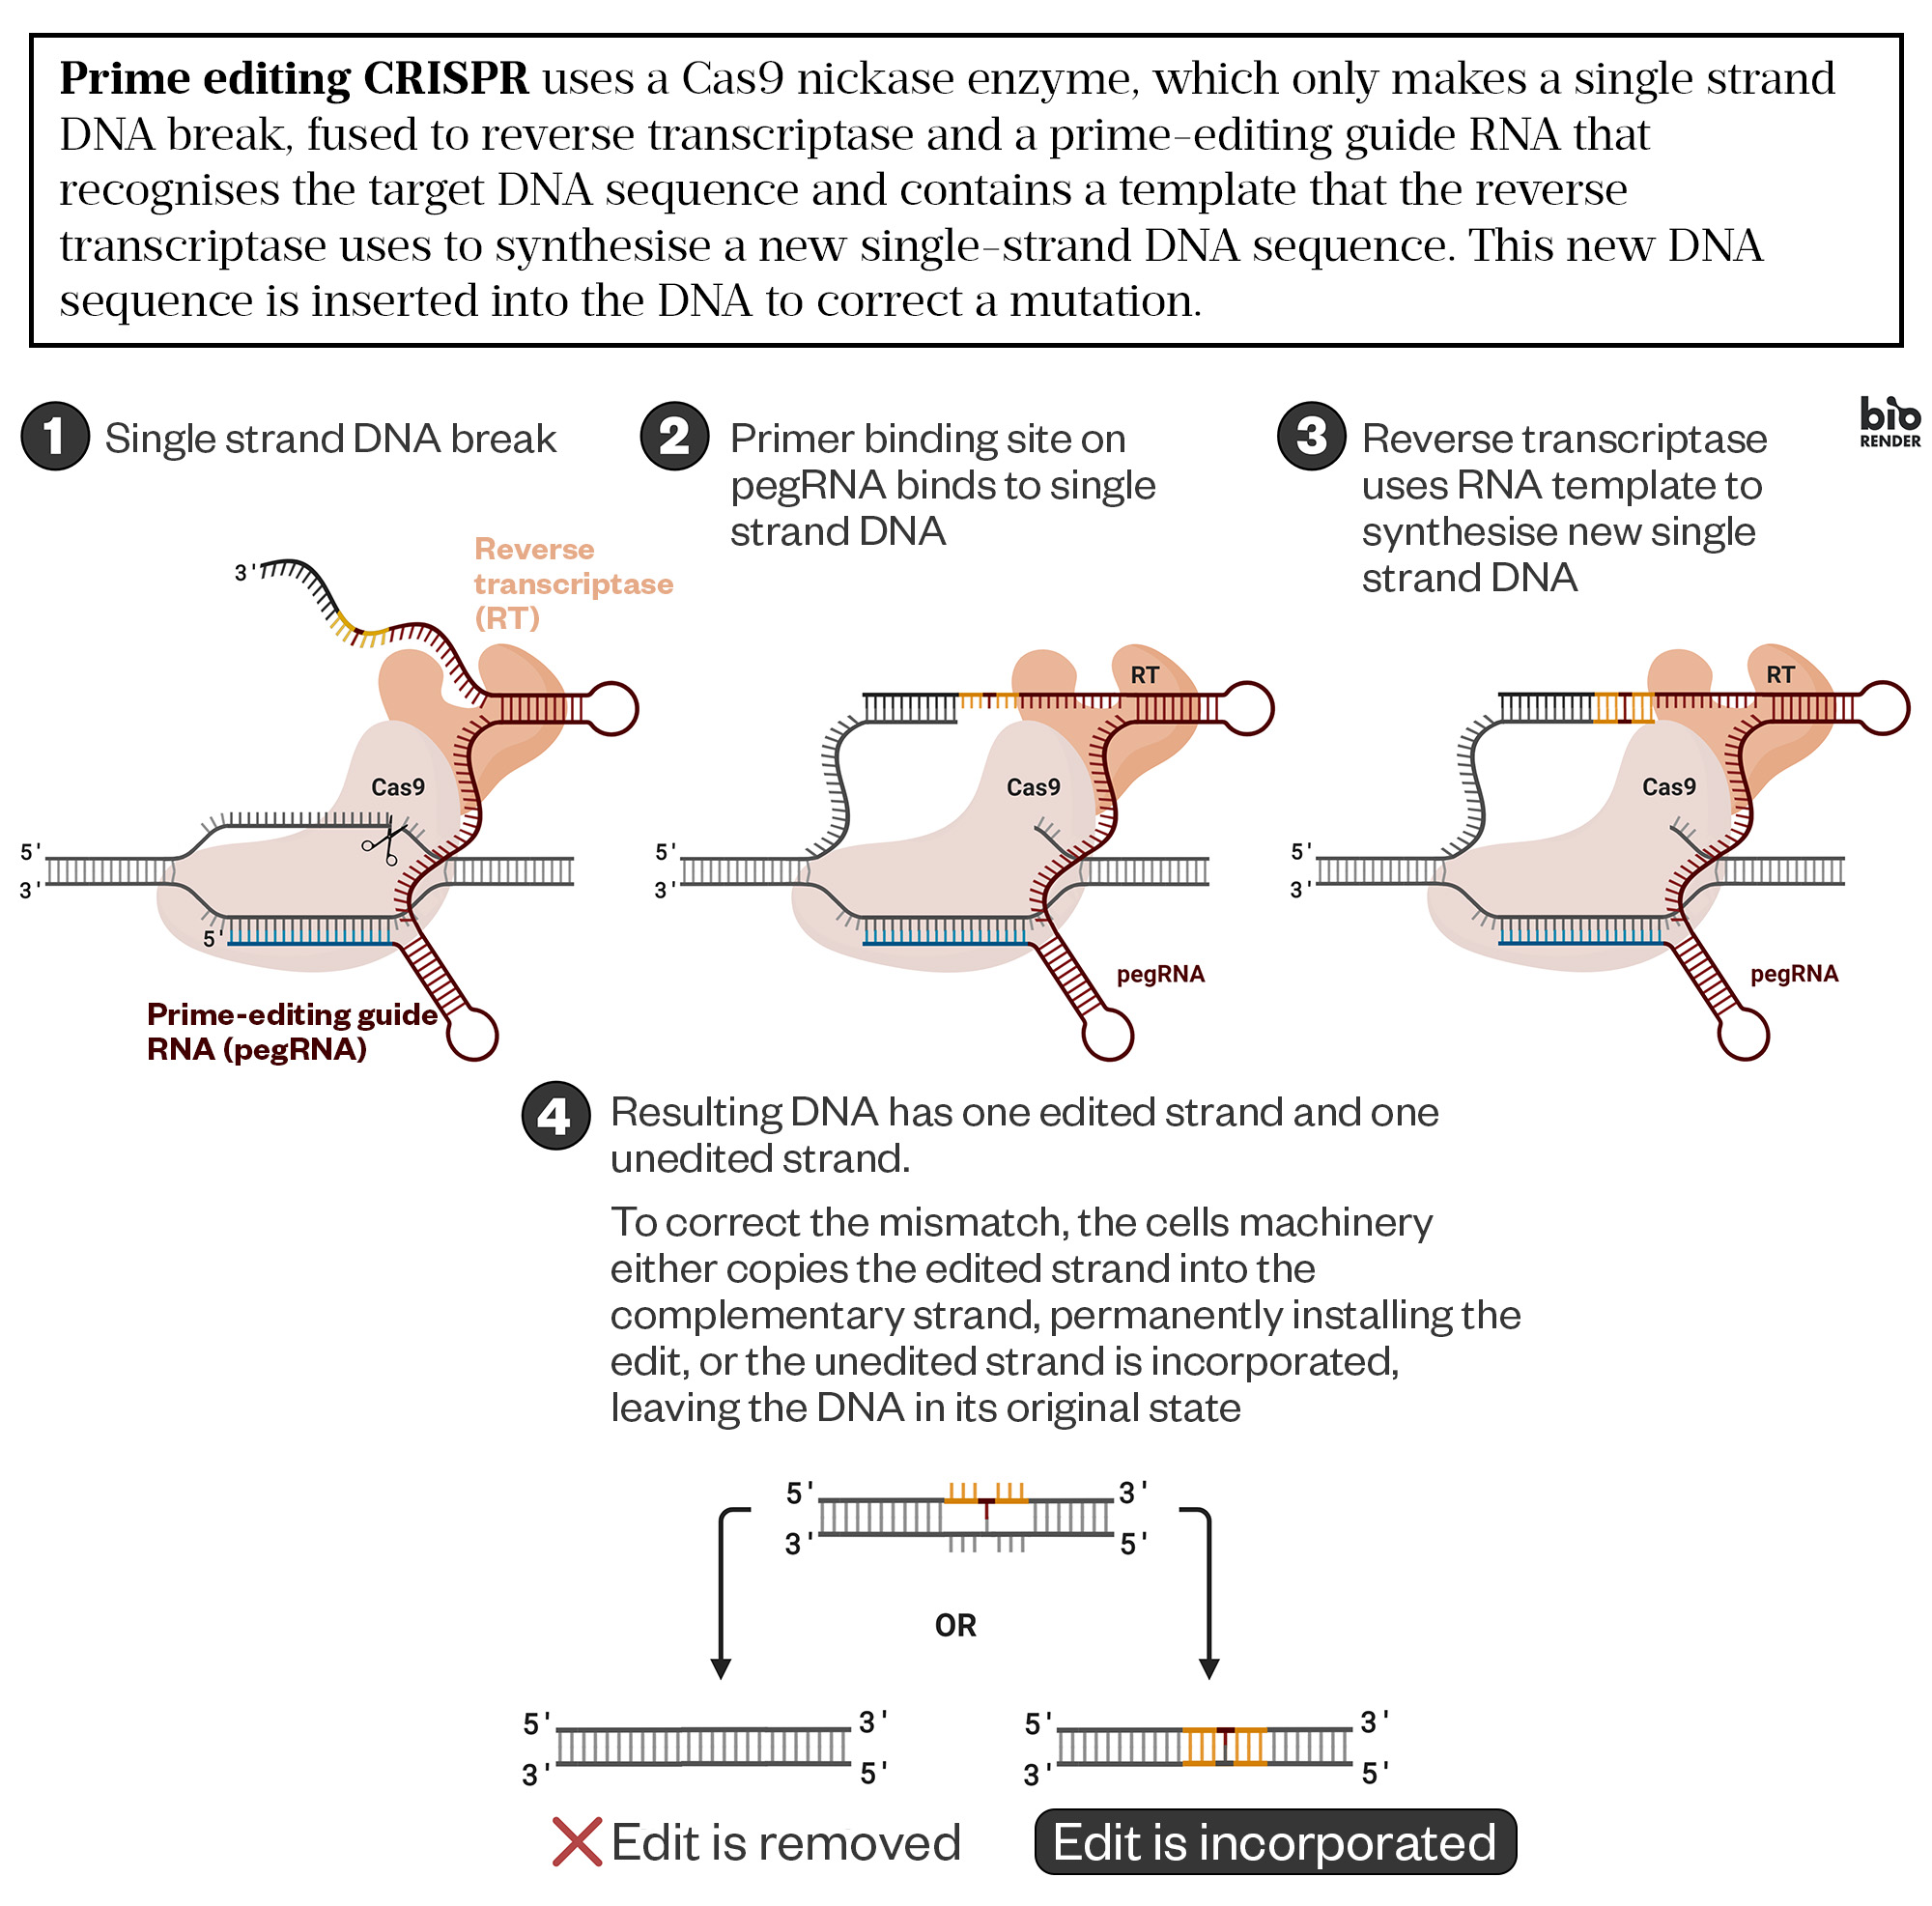 Diagram showing four step simplification of the prime editing mechanism. Text reads: Prime editing CRISPR uses a Cas9 nickase enzyme, which only makes a single strand DNA break, fused to reverse transcriptase and a prime-editing guide RNA that recognises the target DNA sequence and contains a template that the reverse transcriptase uses to synthesise a new single-strand DNA sequence. This new DNA sequence is inserted into the DNA to correct a mutation.